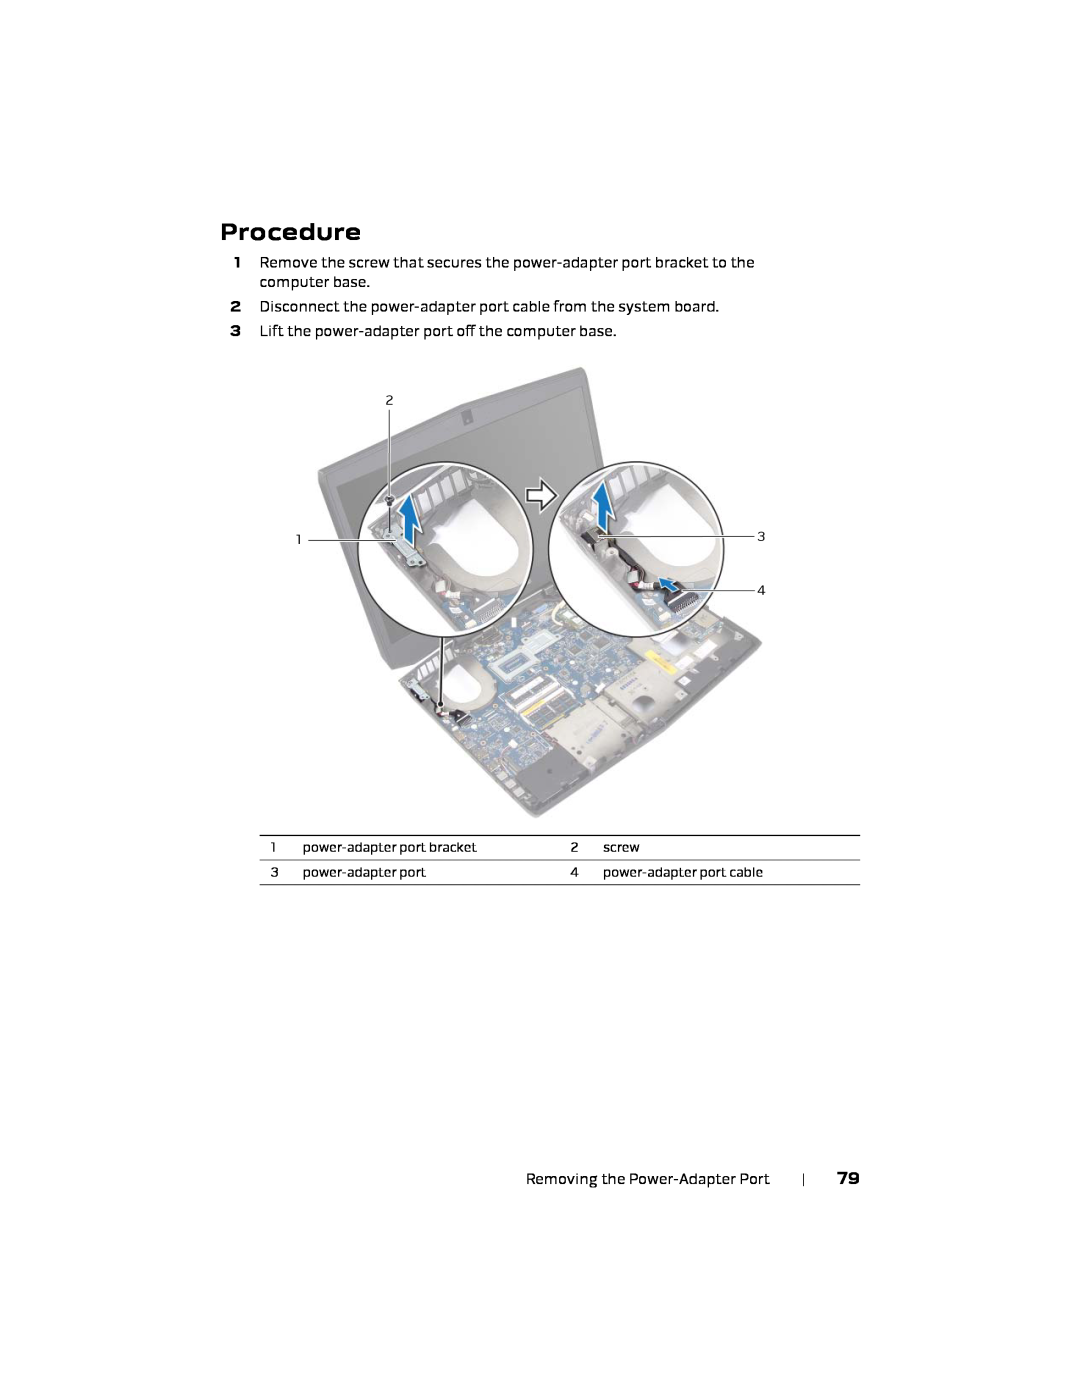 Alienware 17 R1, P18E owner manual Procedure, power-adapter port bracket, screw, power-adapter port cable 